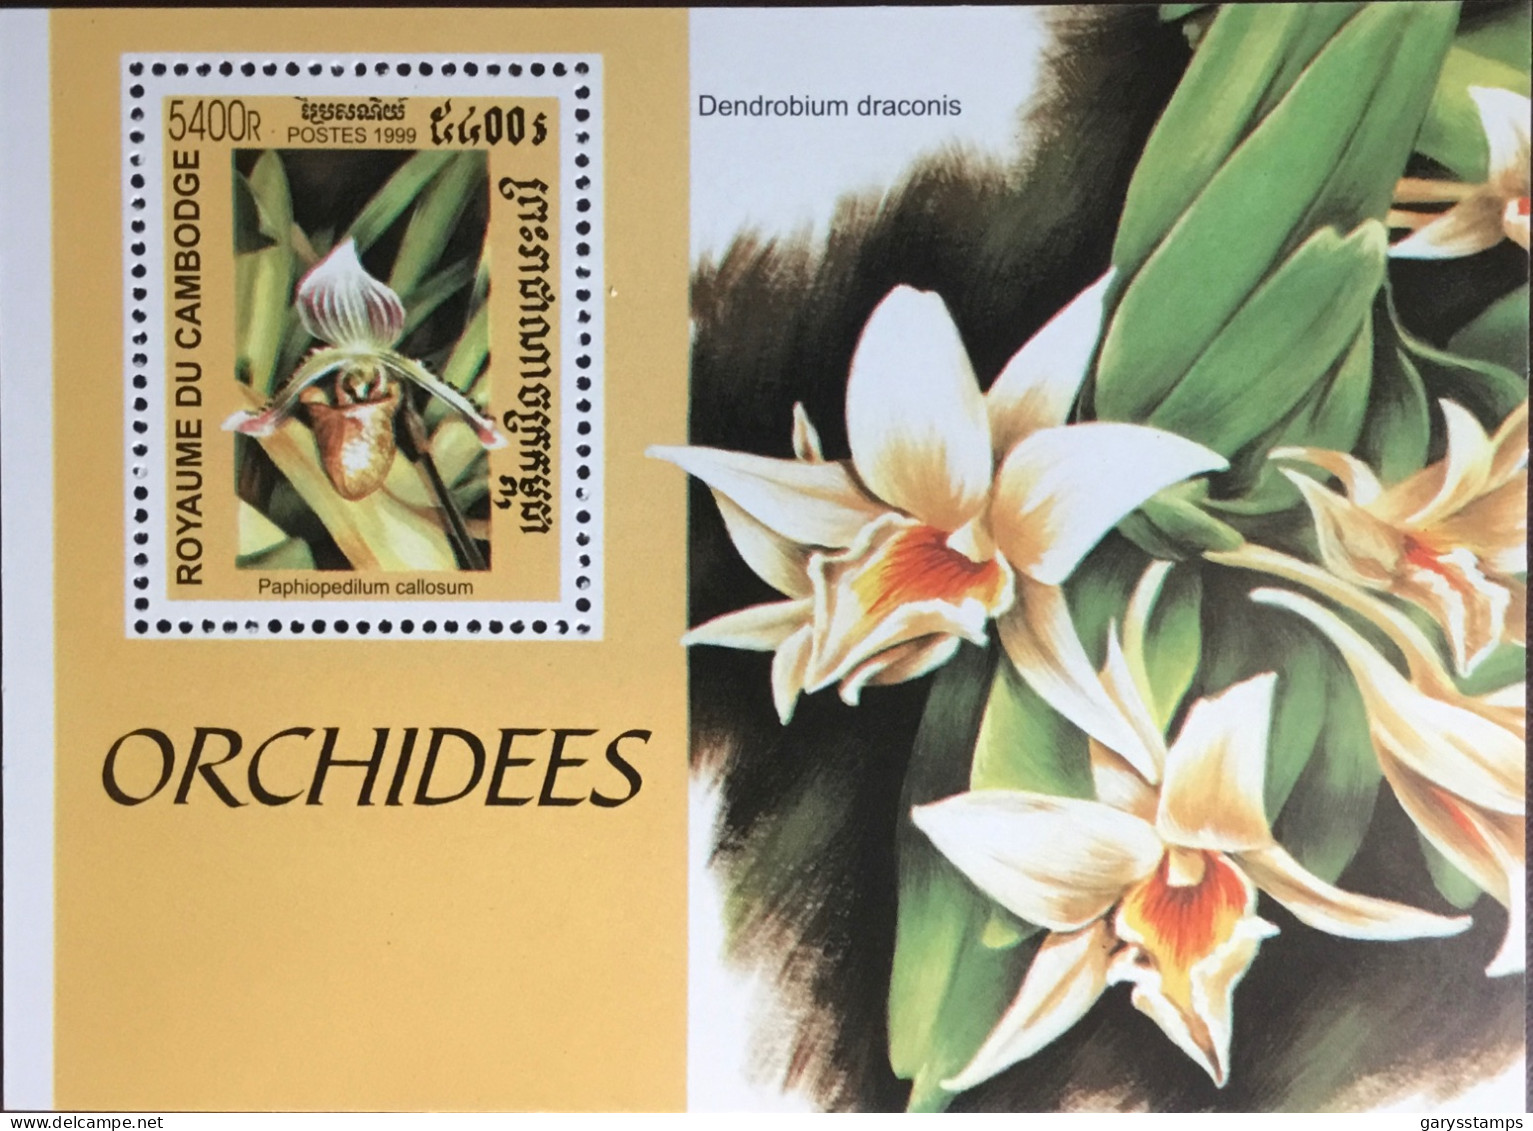 Cambodia 1999 Orchids Flowers Minisheet MNH - Orchids